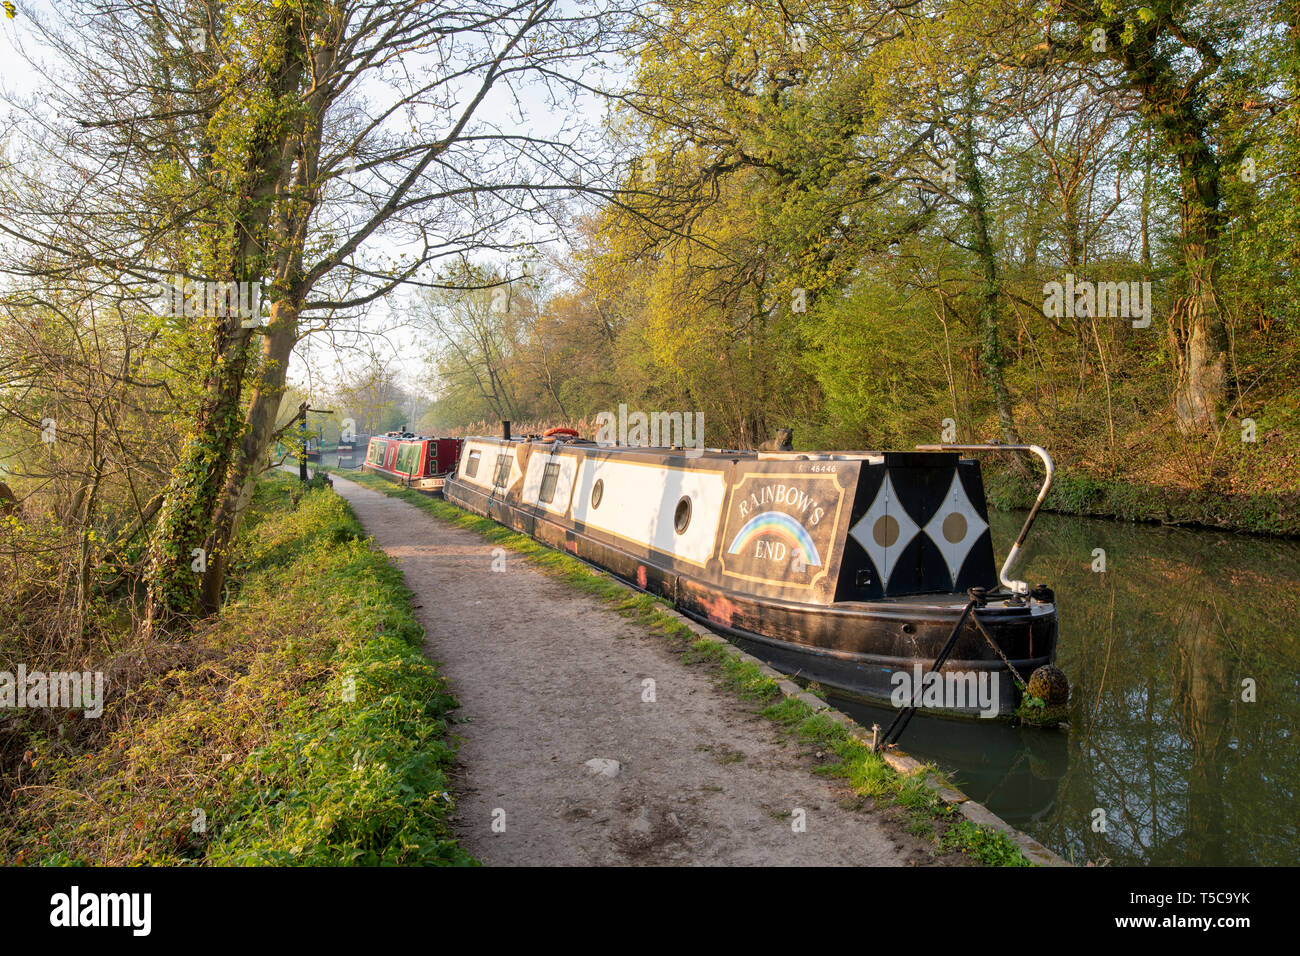 Canal boats on the oxford canal in the early morning spring sunlight. Shipton on Cherwell, Oxfordshire, England Stock Photo